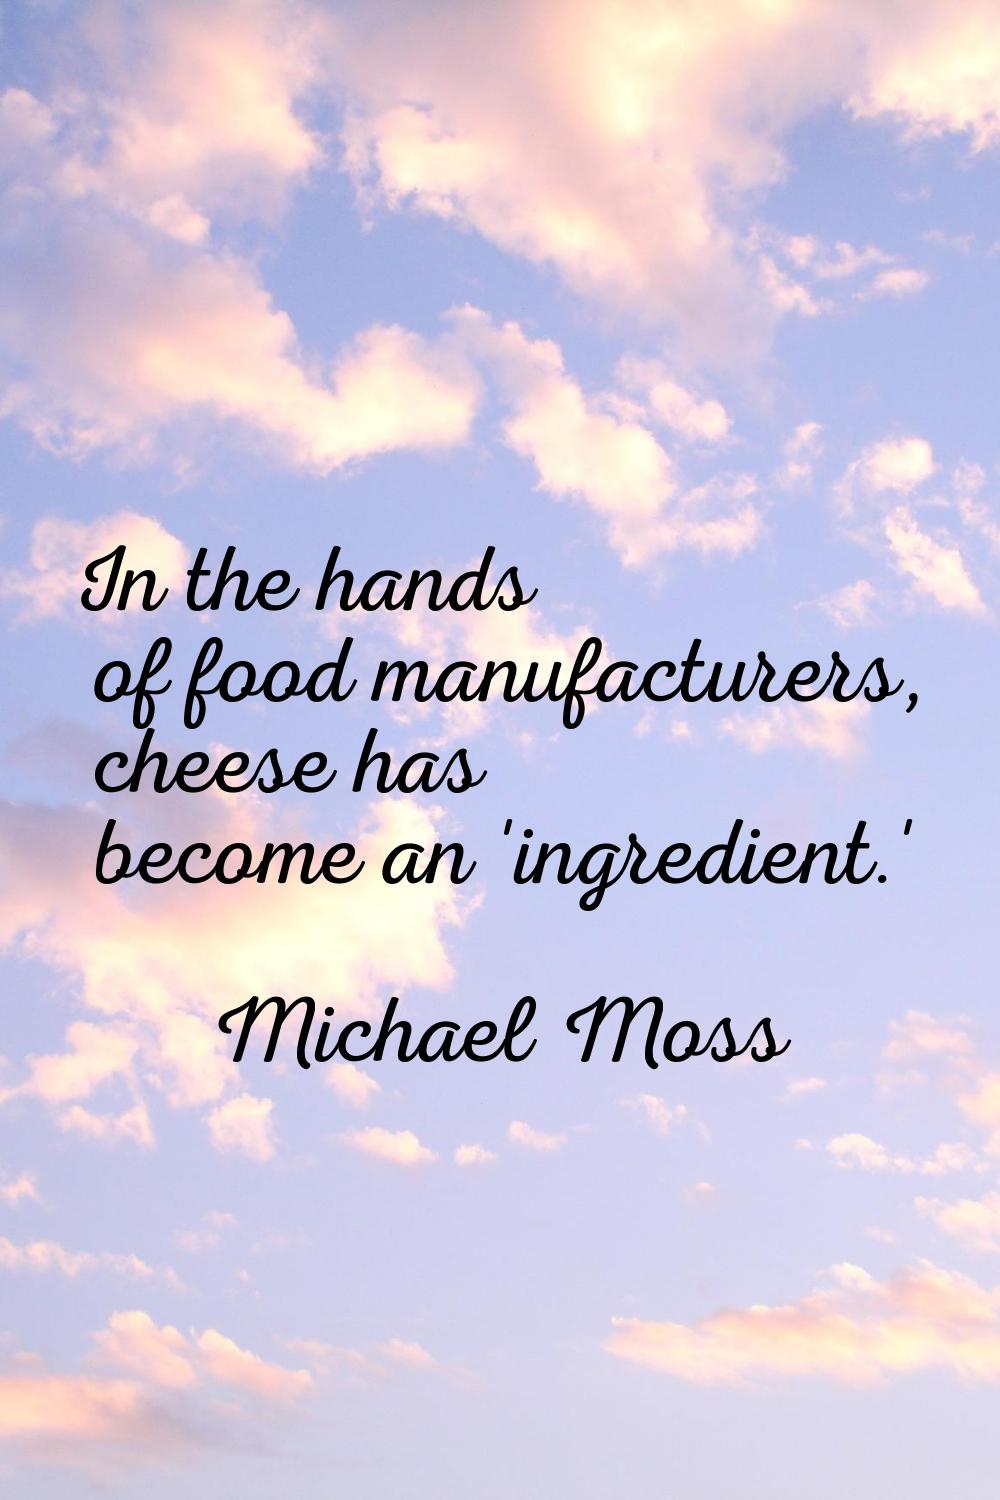 In the hands of food manufacturers, cheese has become an 'ingredient.'